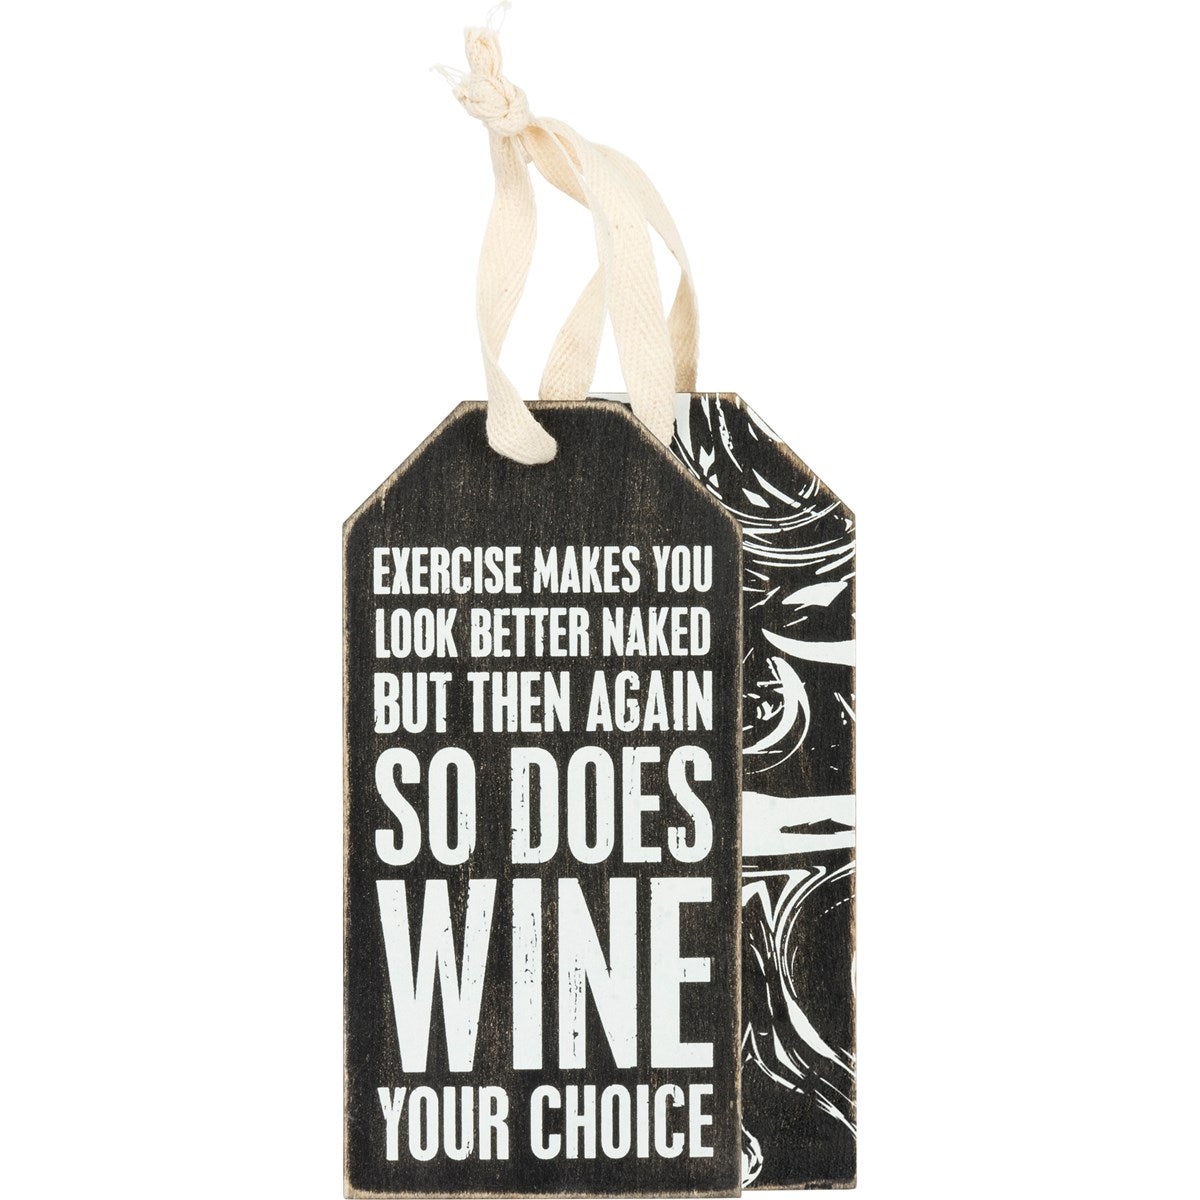 "SO DOES WINE" BOTTLE TAG